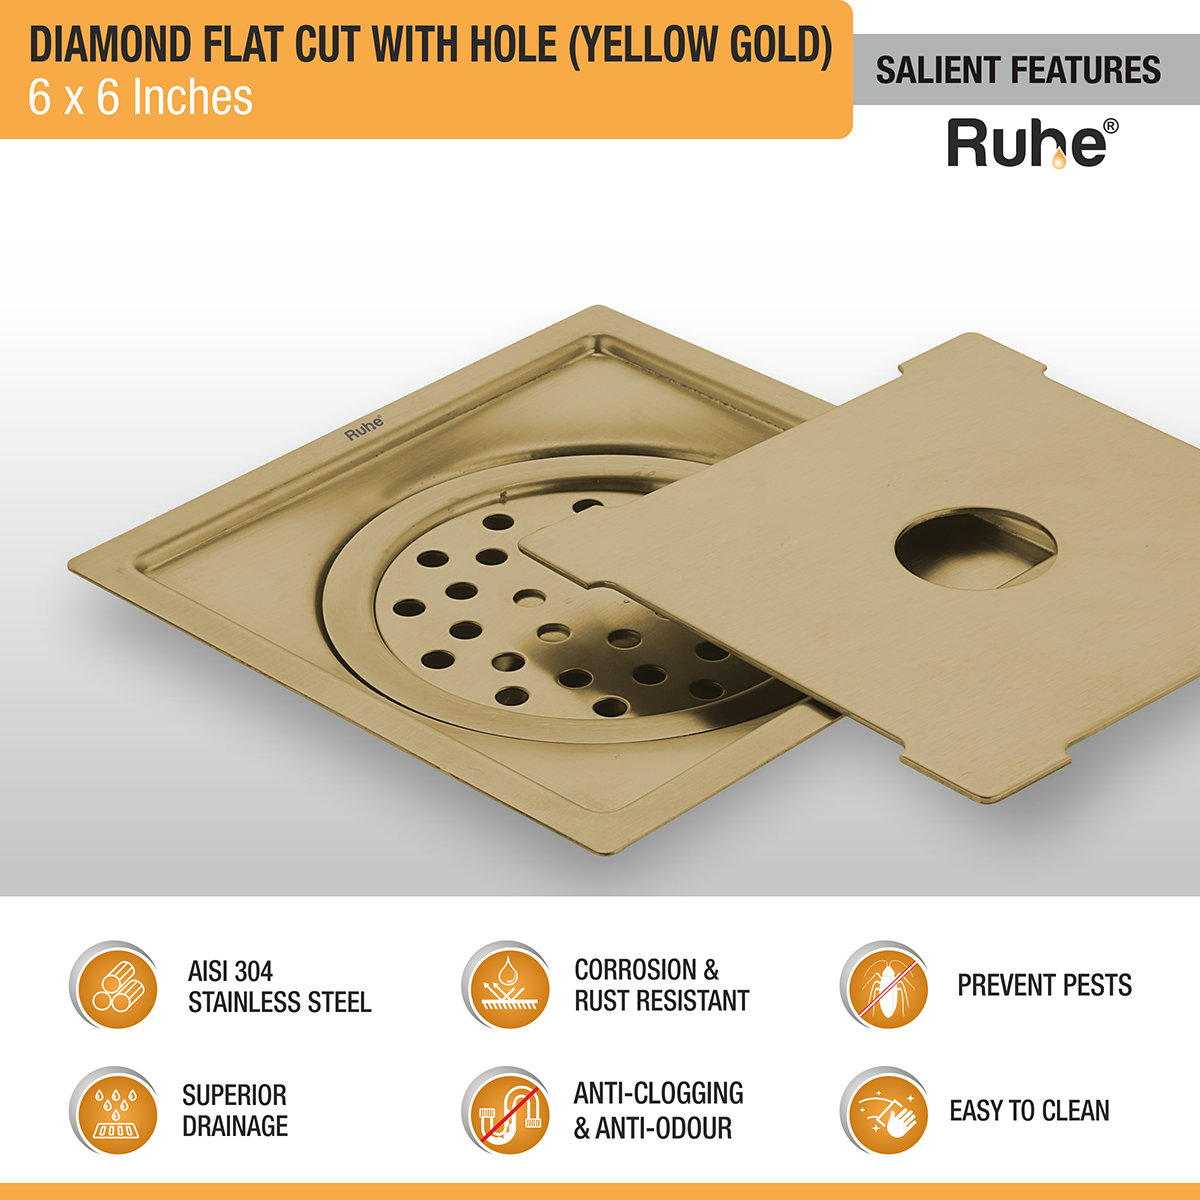 Diamond Square Flat Cut Floor Drain in Yellow Gold PVD Coating (6 x 6 Inches) with Hole features